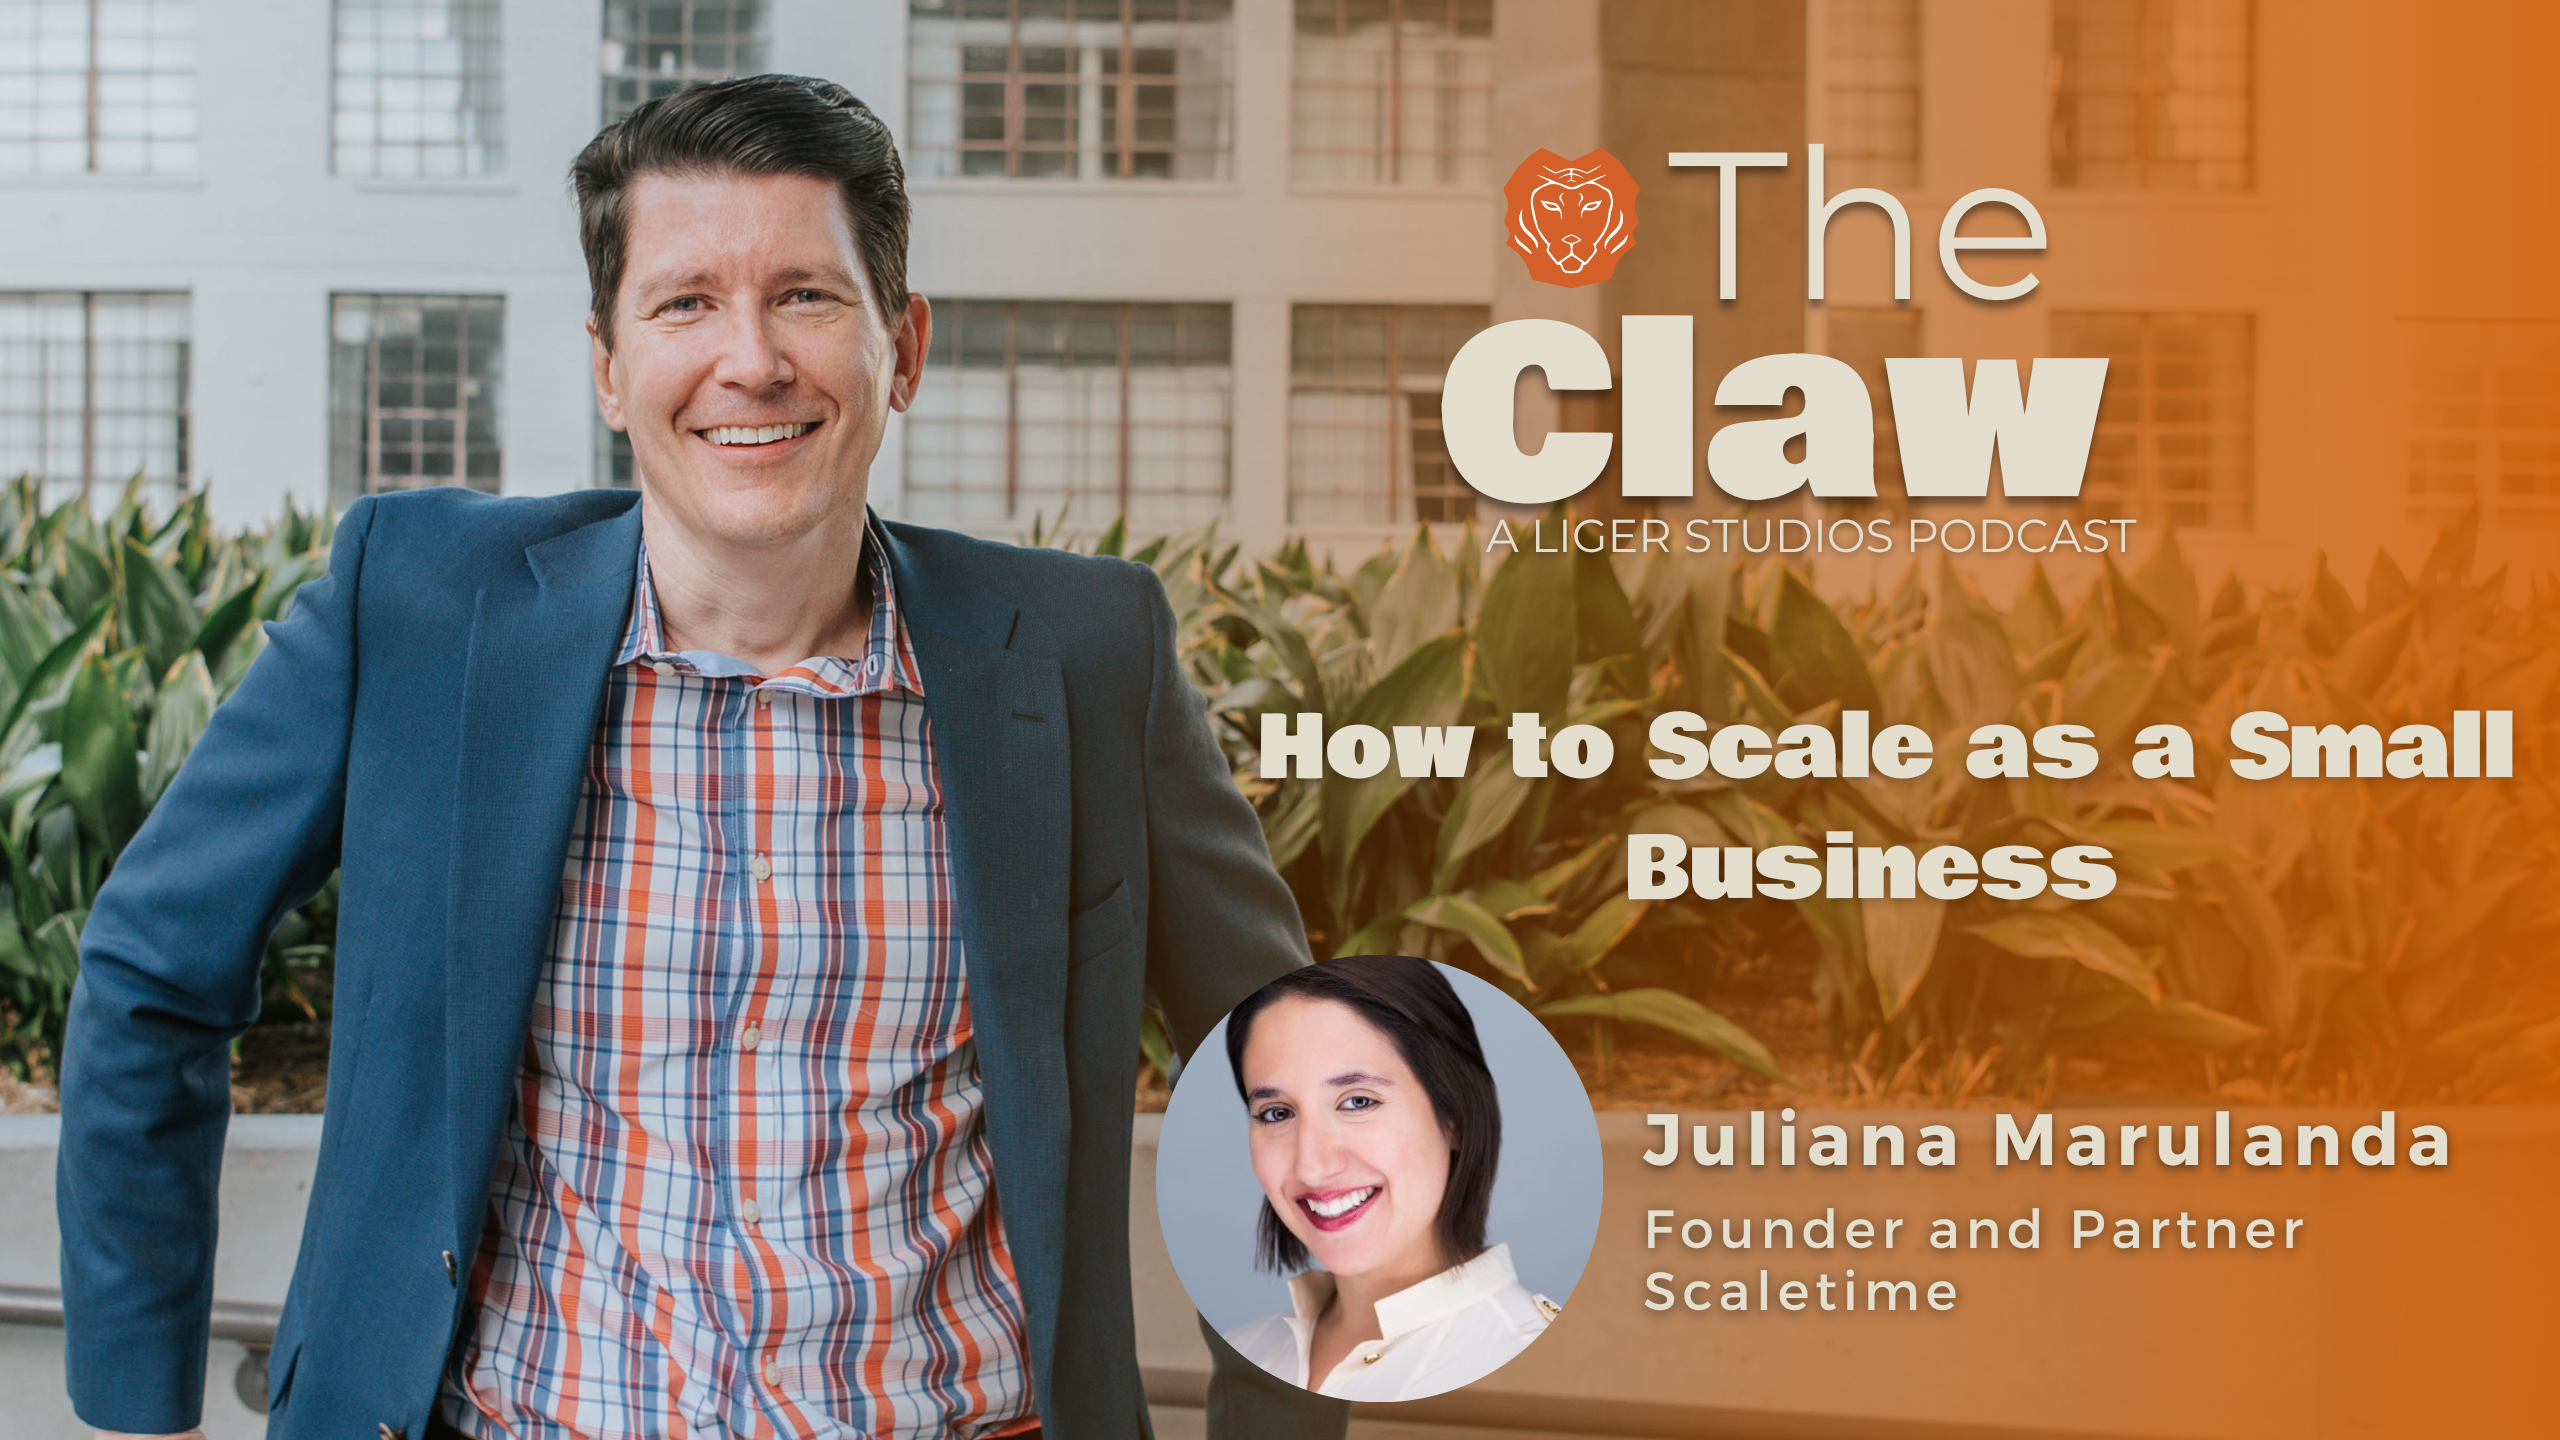 The Claw Podcast: How to Scale as a Small Business with Juliana Marulanda